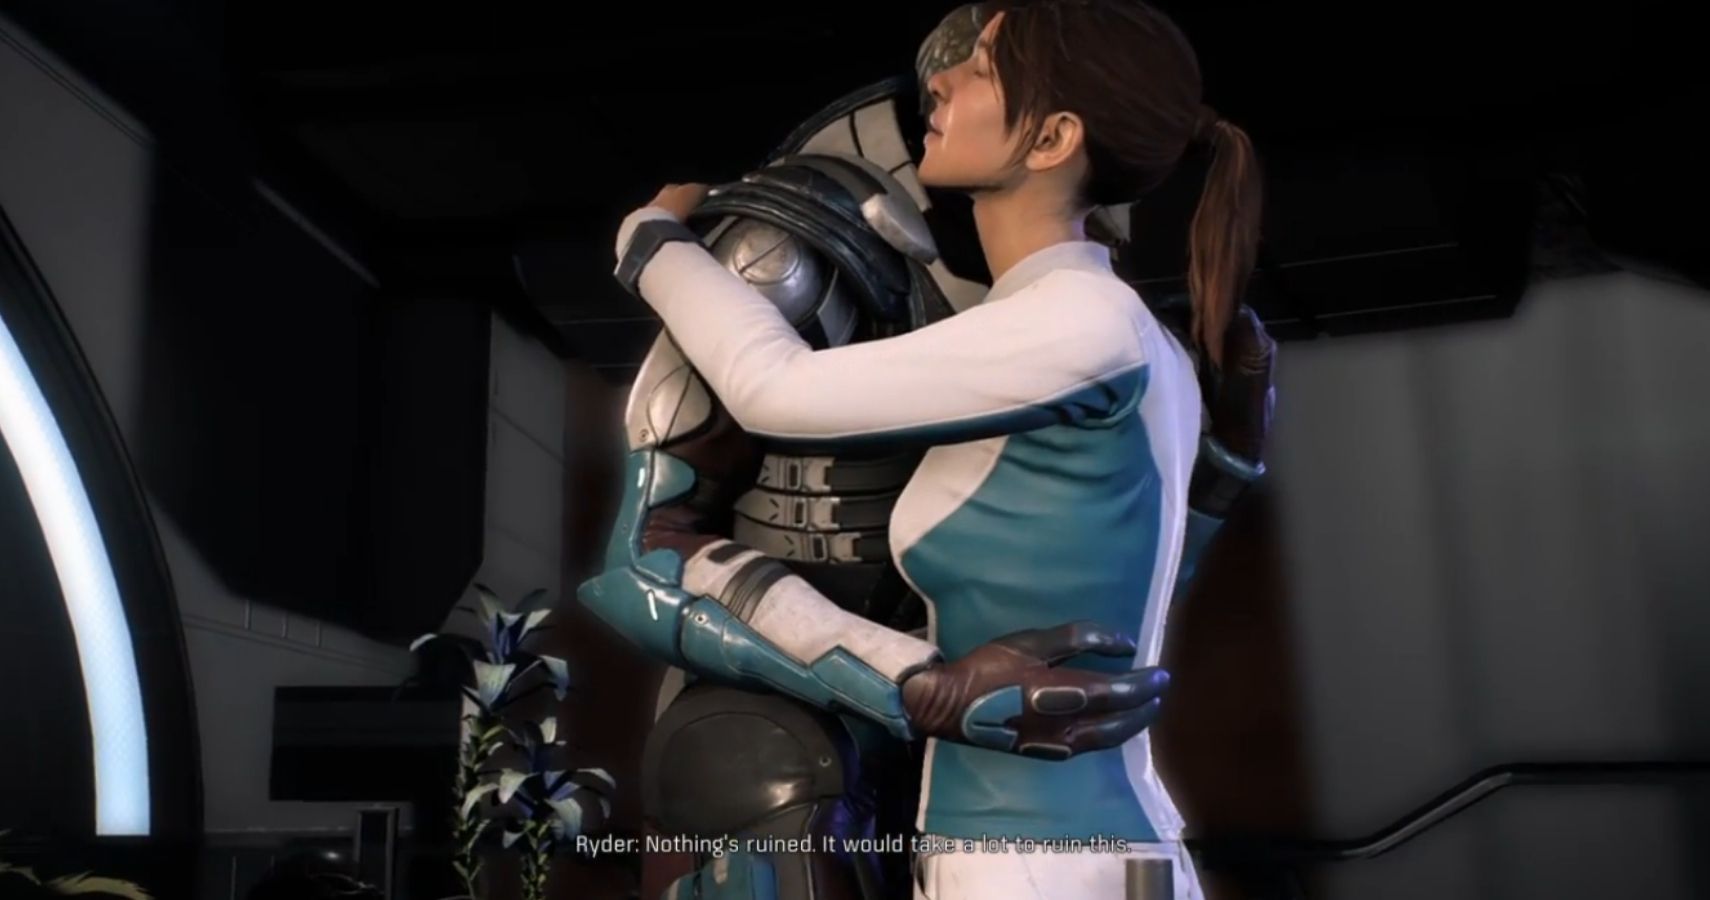 Vetra and Ryder from Mass Effect Andromeda hug in one of their romance scenes